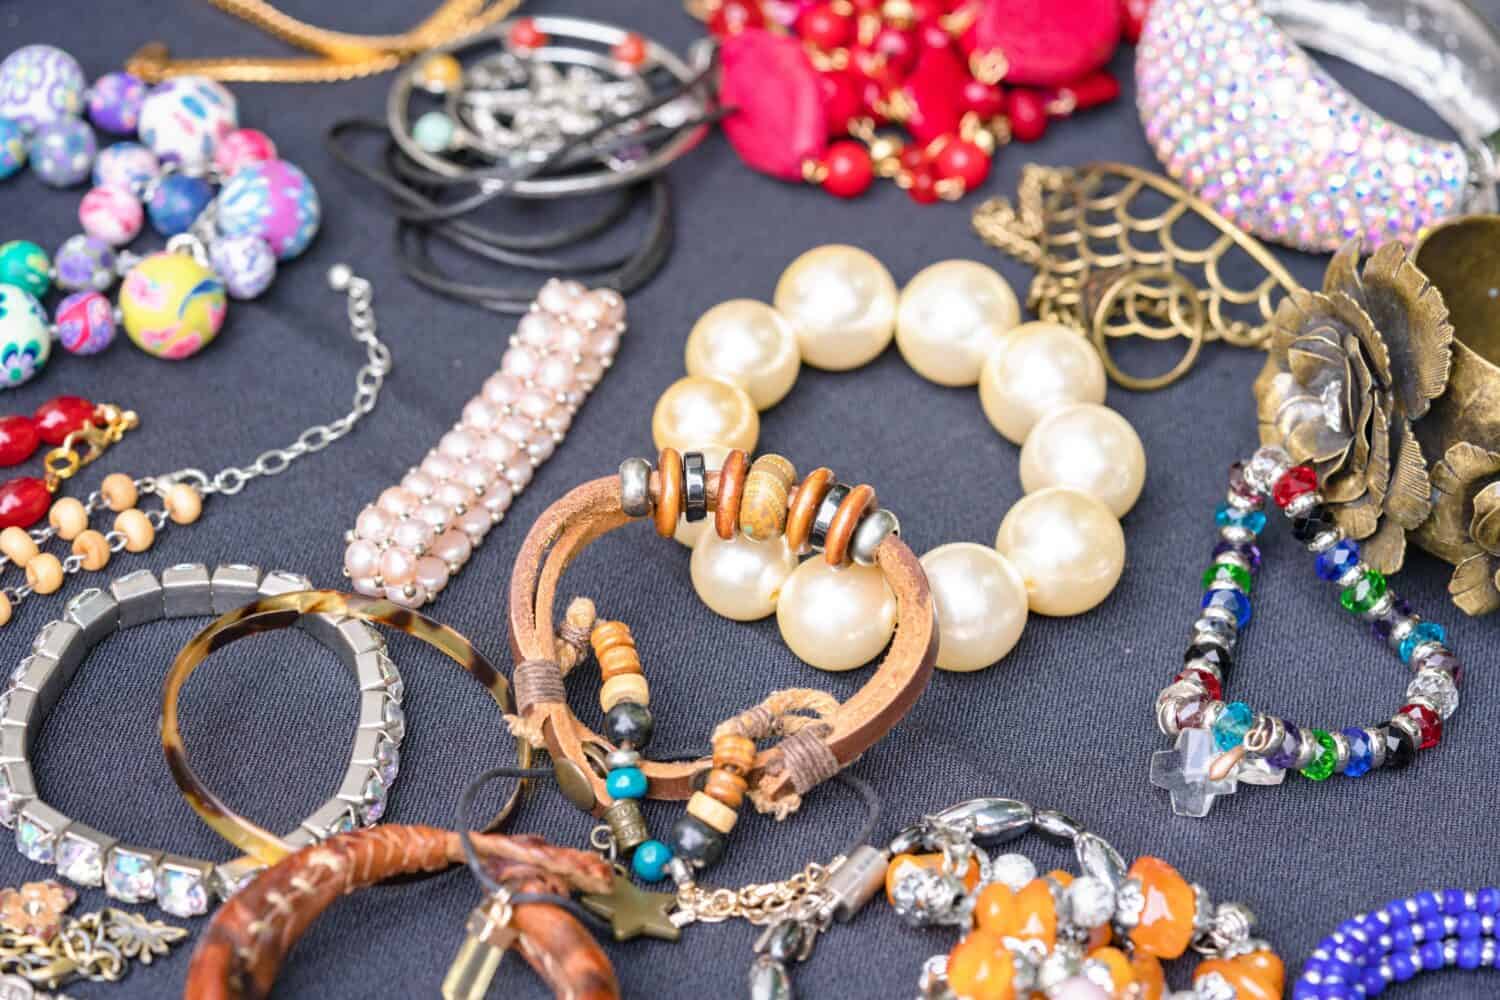 Many vintage old-fashioned jewelry at flea market stall or car boot sale. Retro style bracelets and necklaces. Vintage goods for sale. Garage sale concept. Selective focus